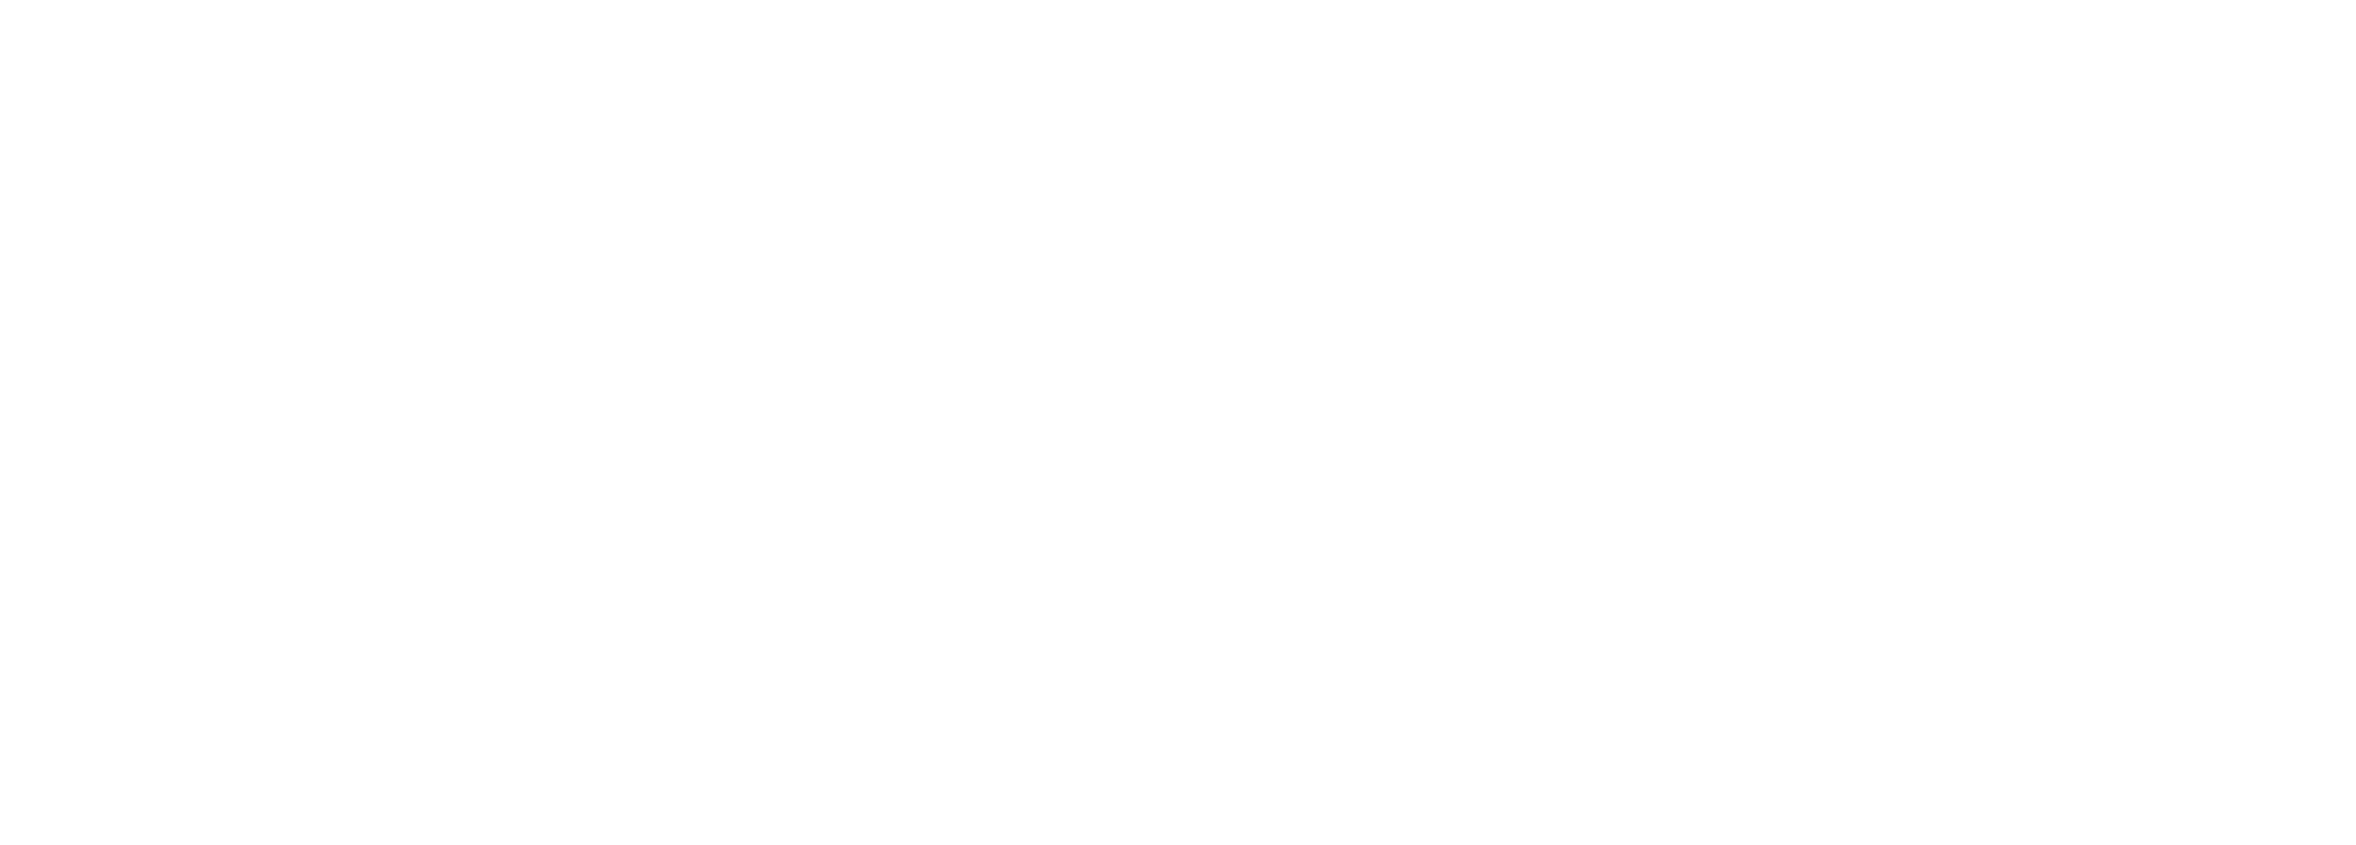 Ecco Logo - ecco solutions ltd. evidenced client centred solutions